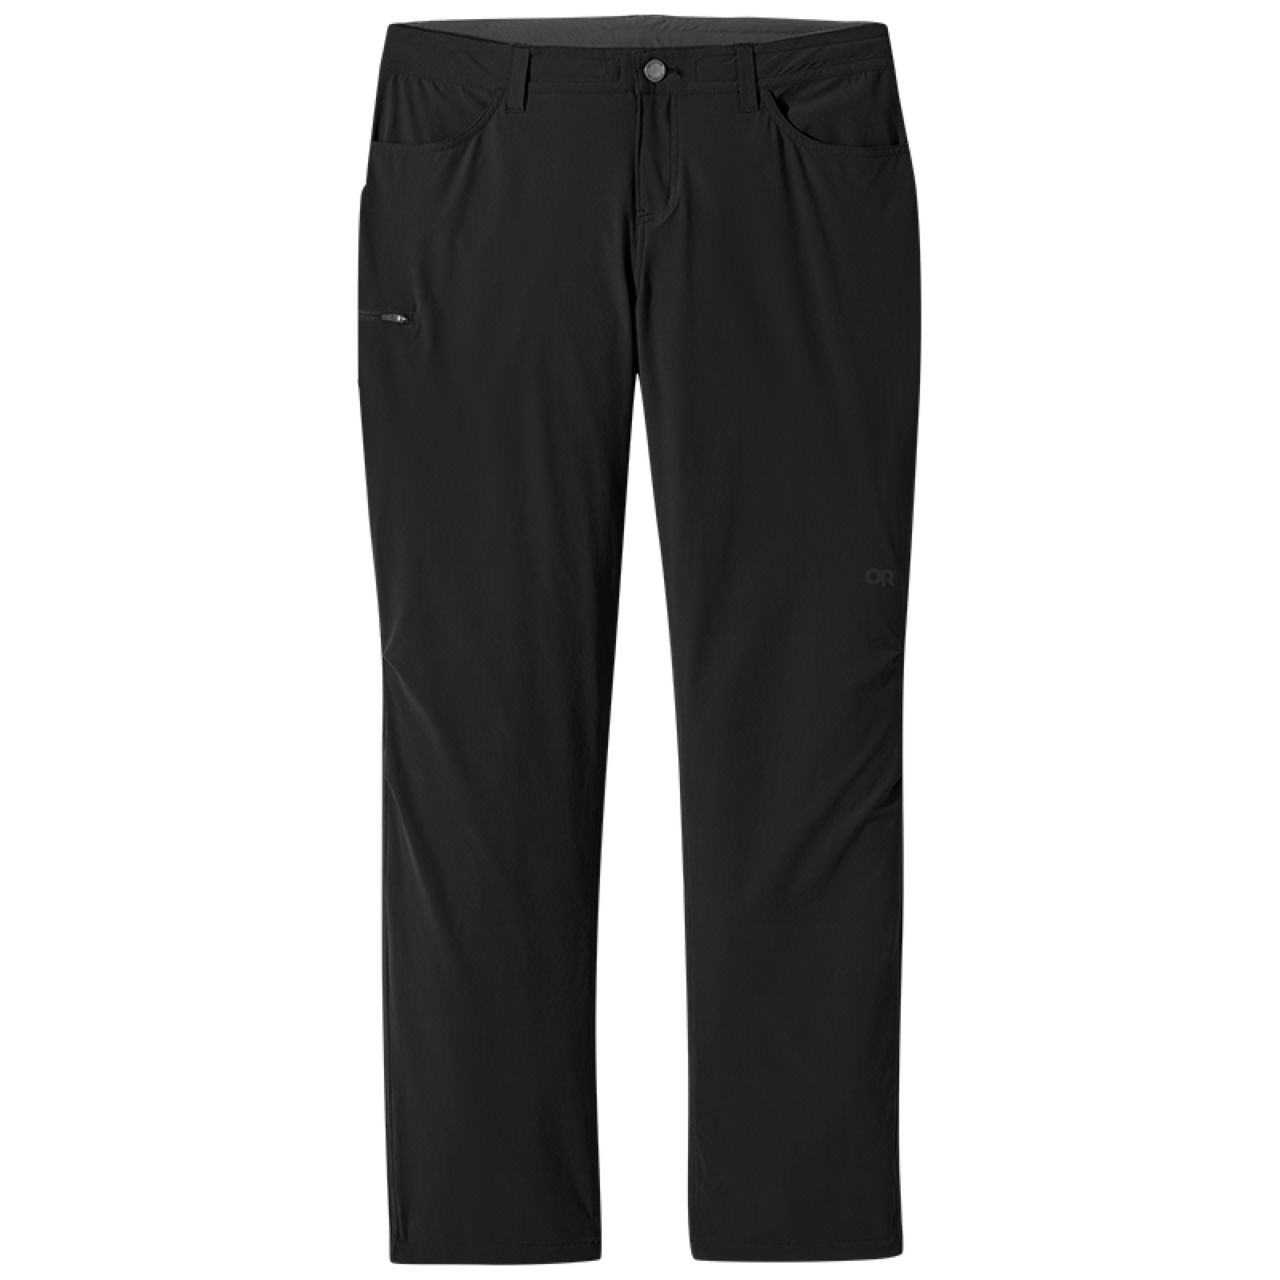 Outdoor Research Ferrosi Convertible Pants Review 